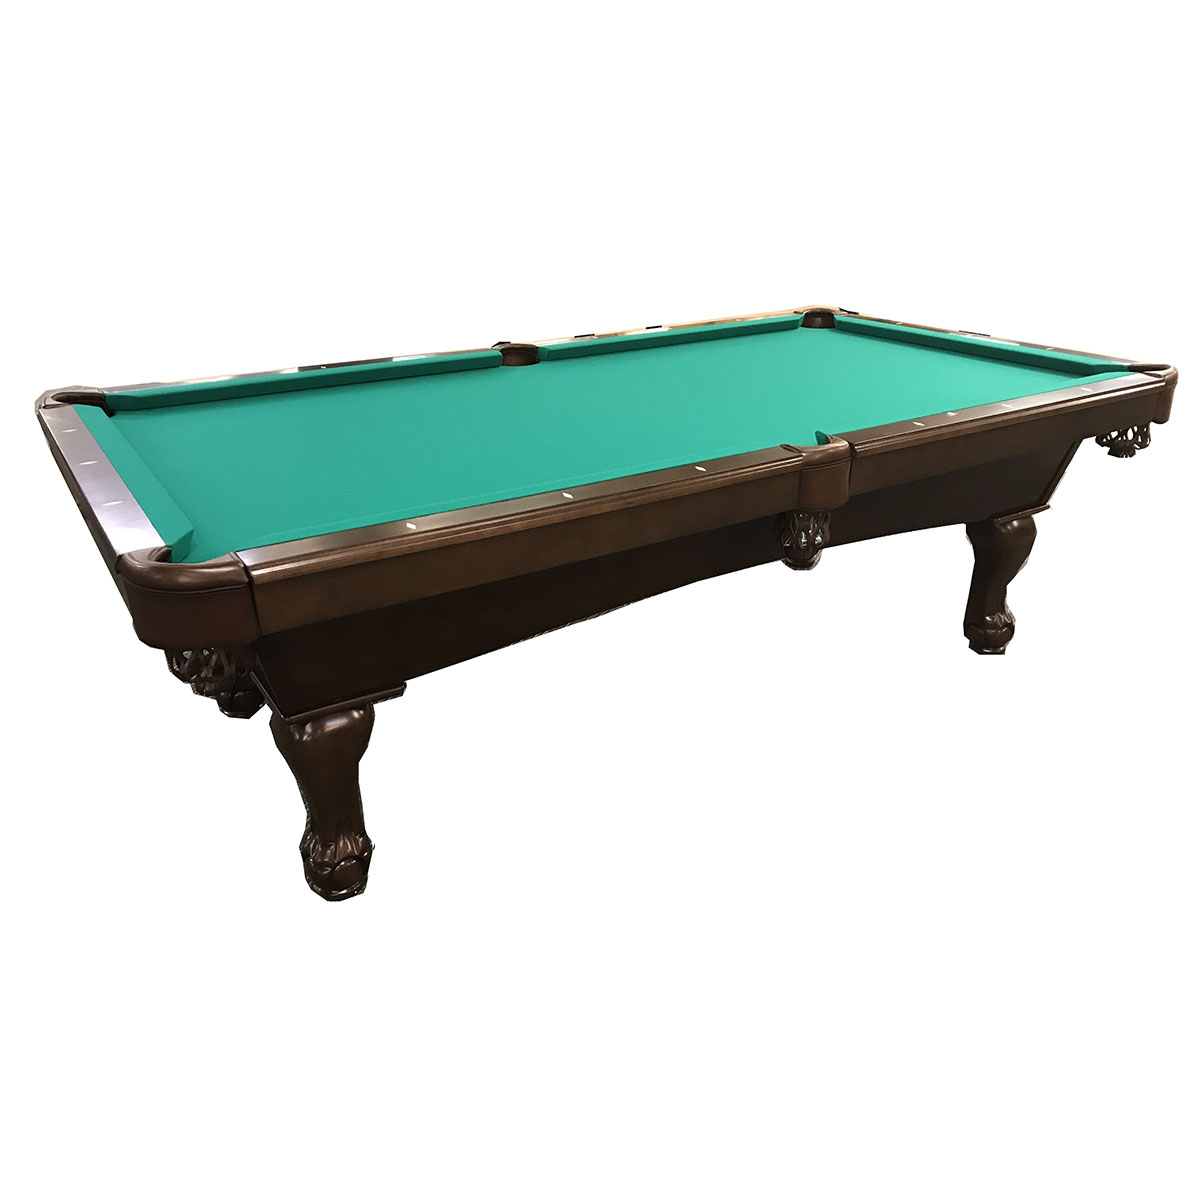 Pool and Billiard Tables In Metro Detroit | Game Room Guys